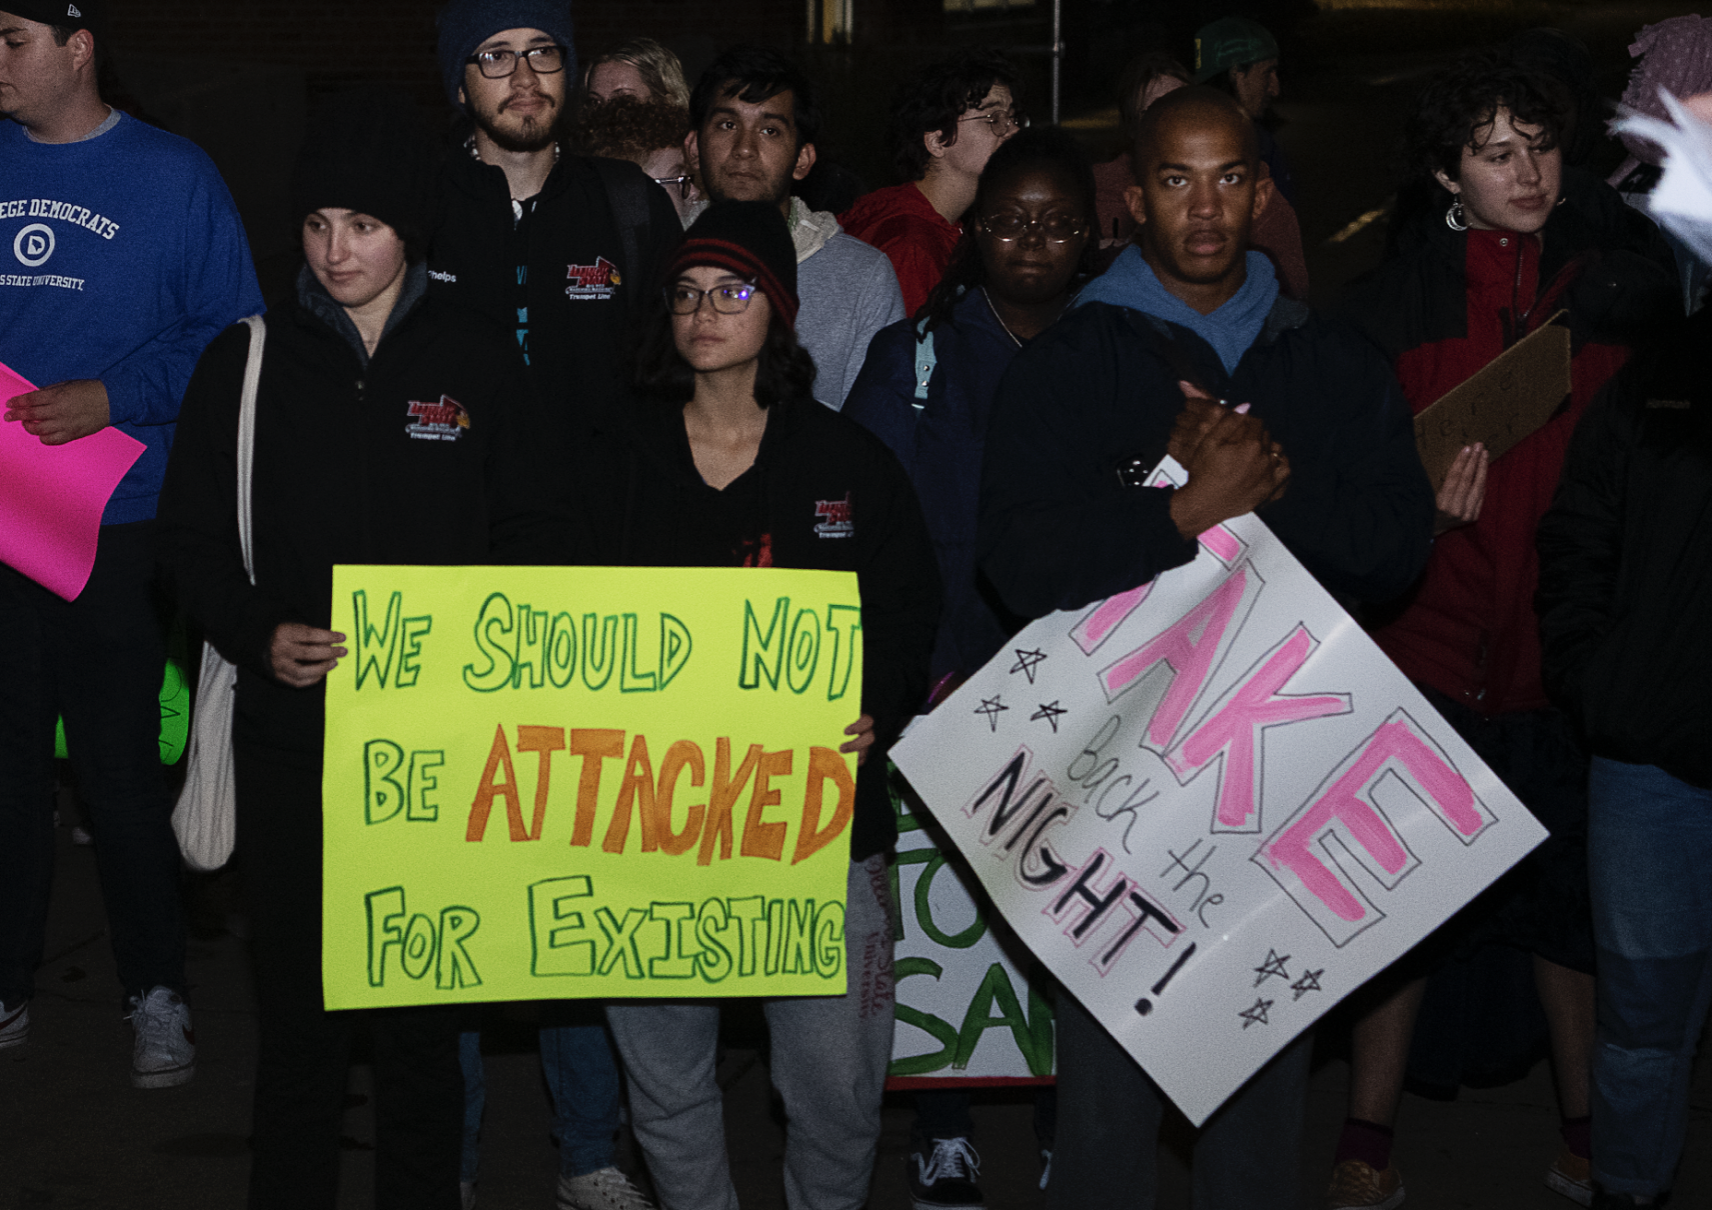 ISU students Take Back the Night to protest sexual violence with rally, march News videtteonline